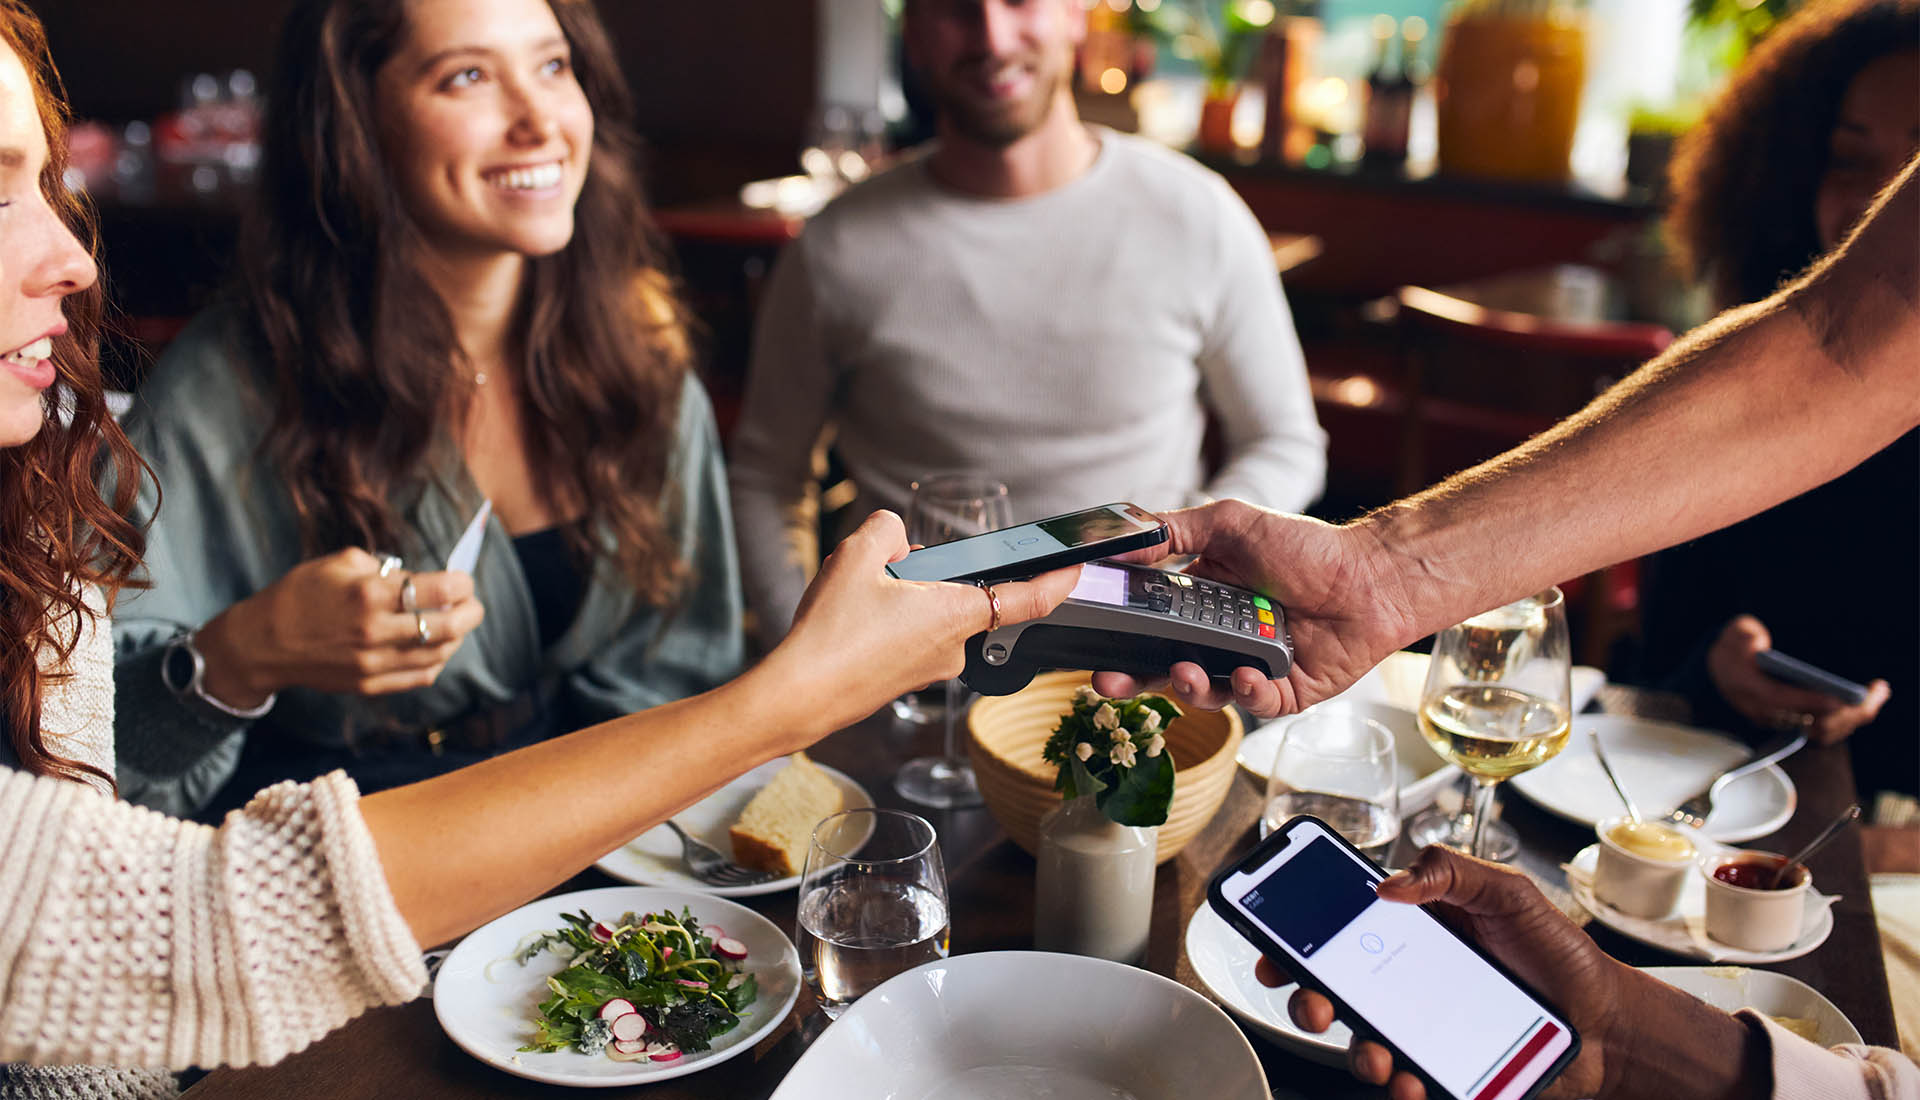 The four ways that restaurants are benefiting from payment innovation